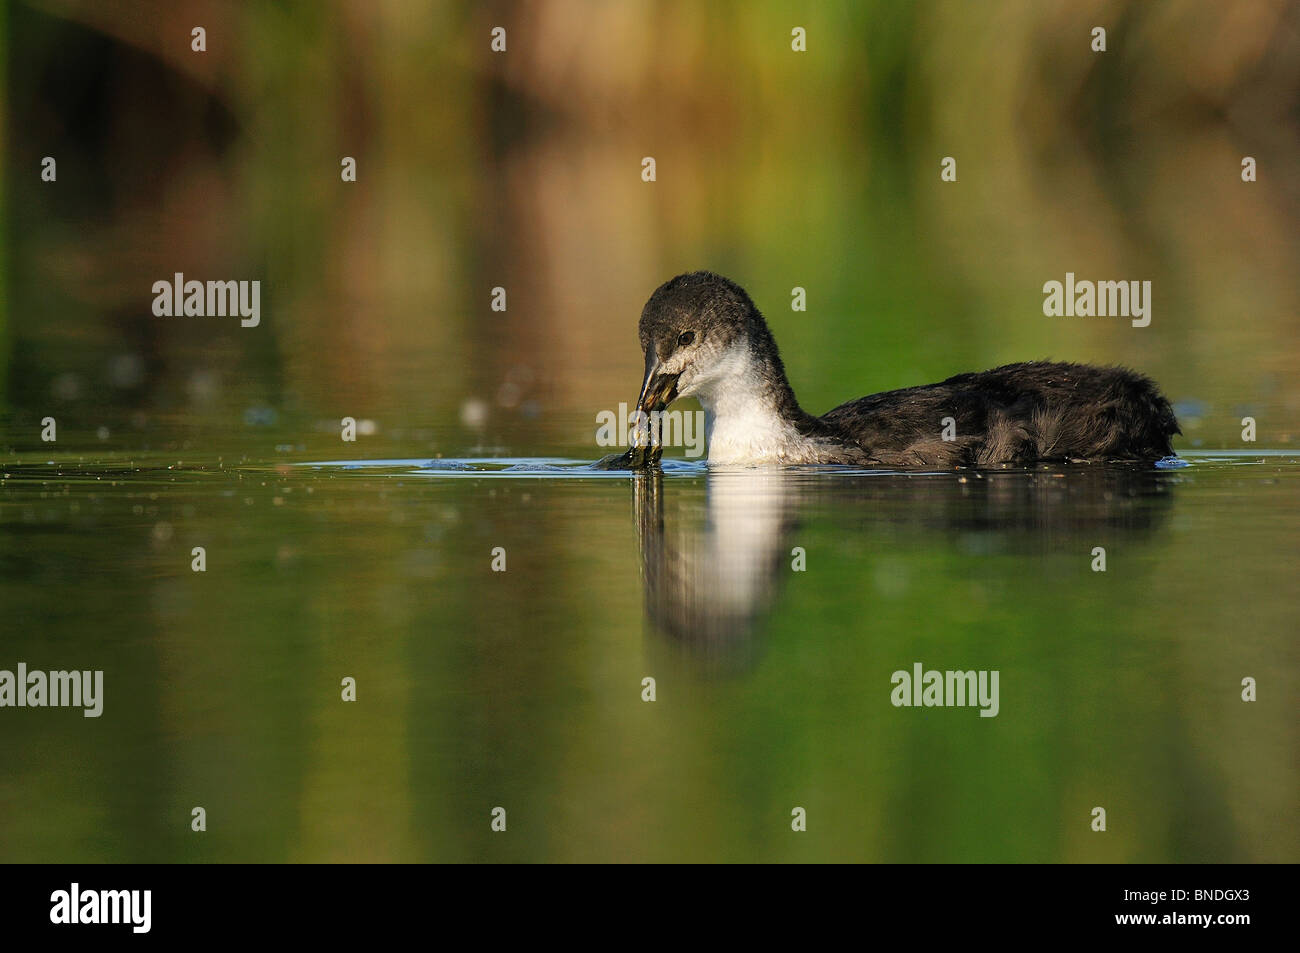 Young of Eurasian Coot (Fulica atra) feeding of vegetable material in the wetland Stock Photo